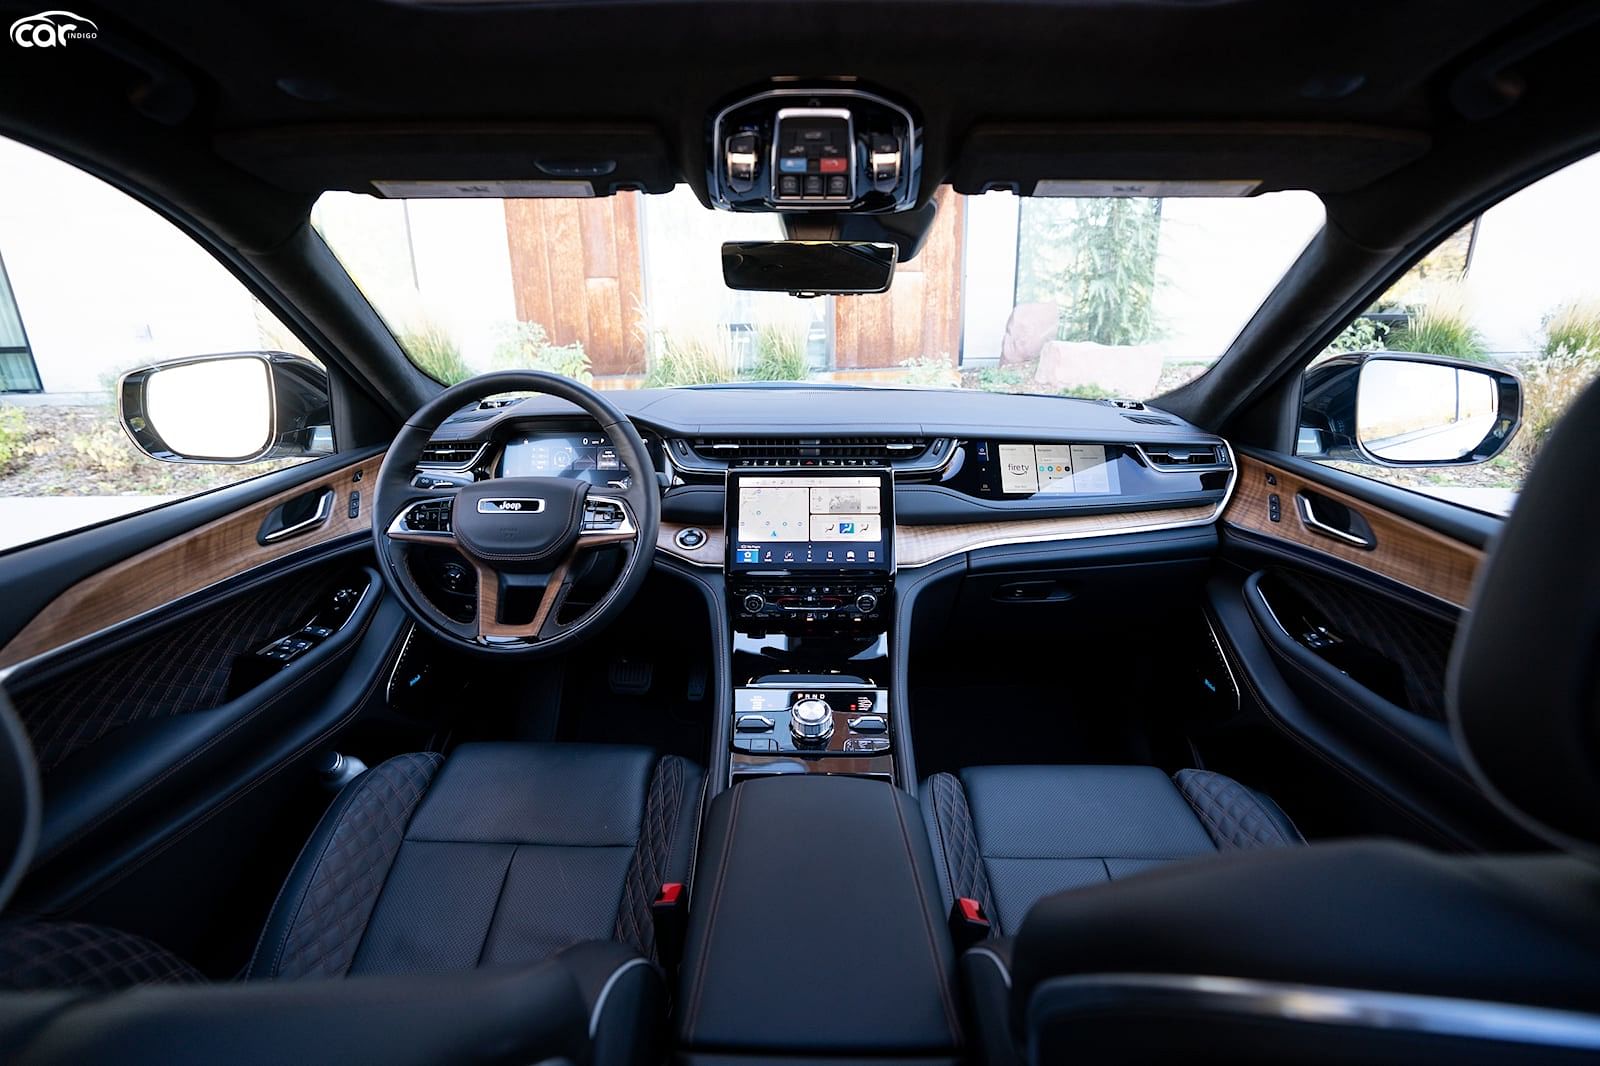 2022 Jeep Grand Cherokee Interior Review Seating, Infotainment